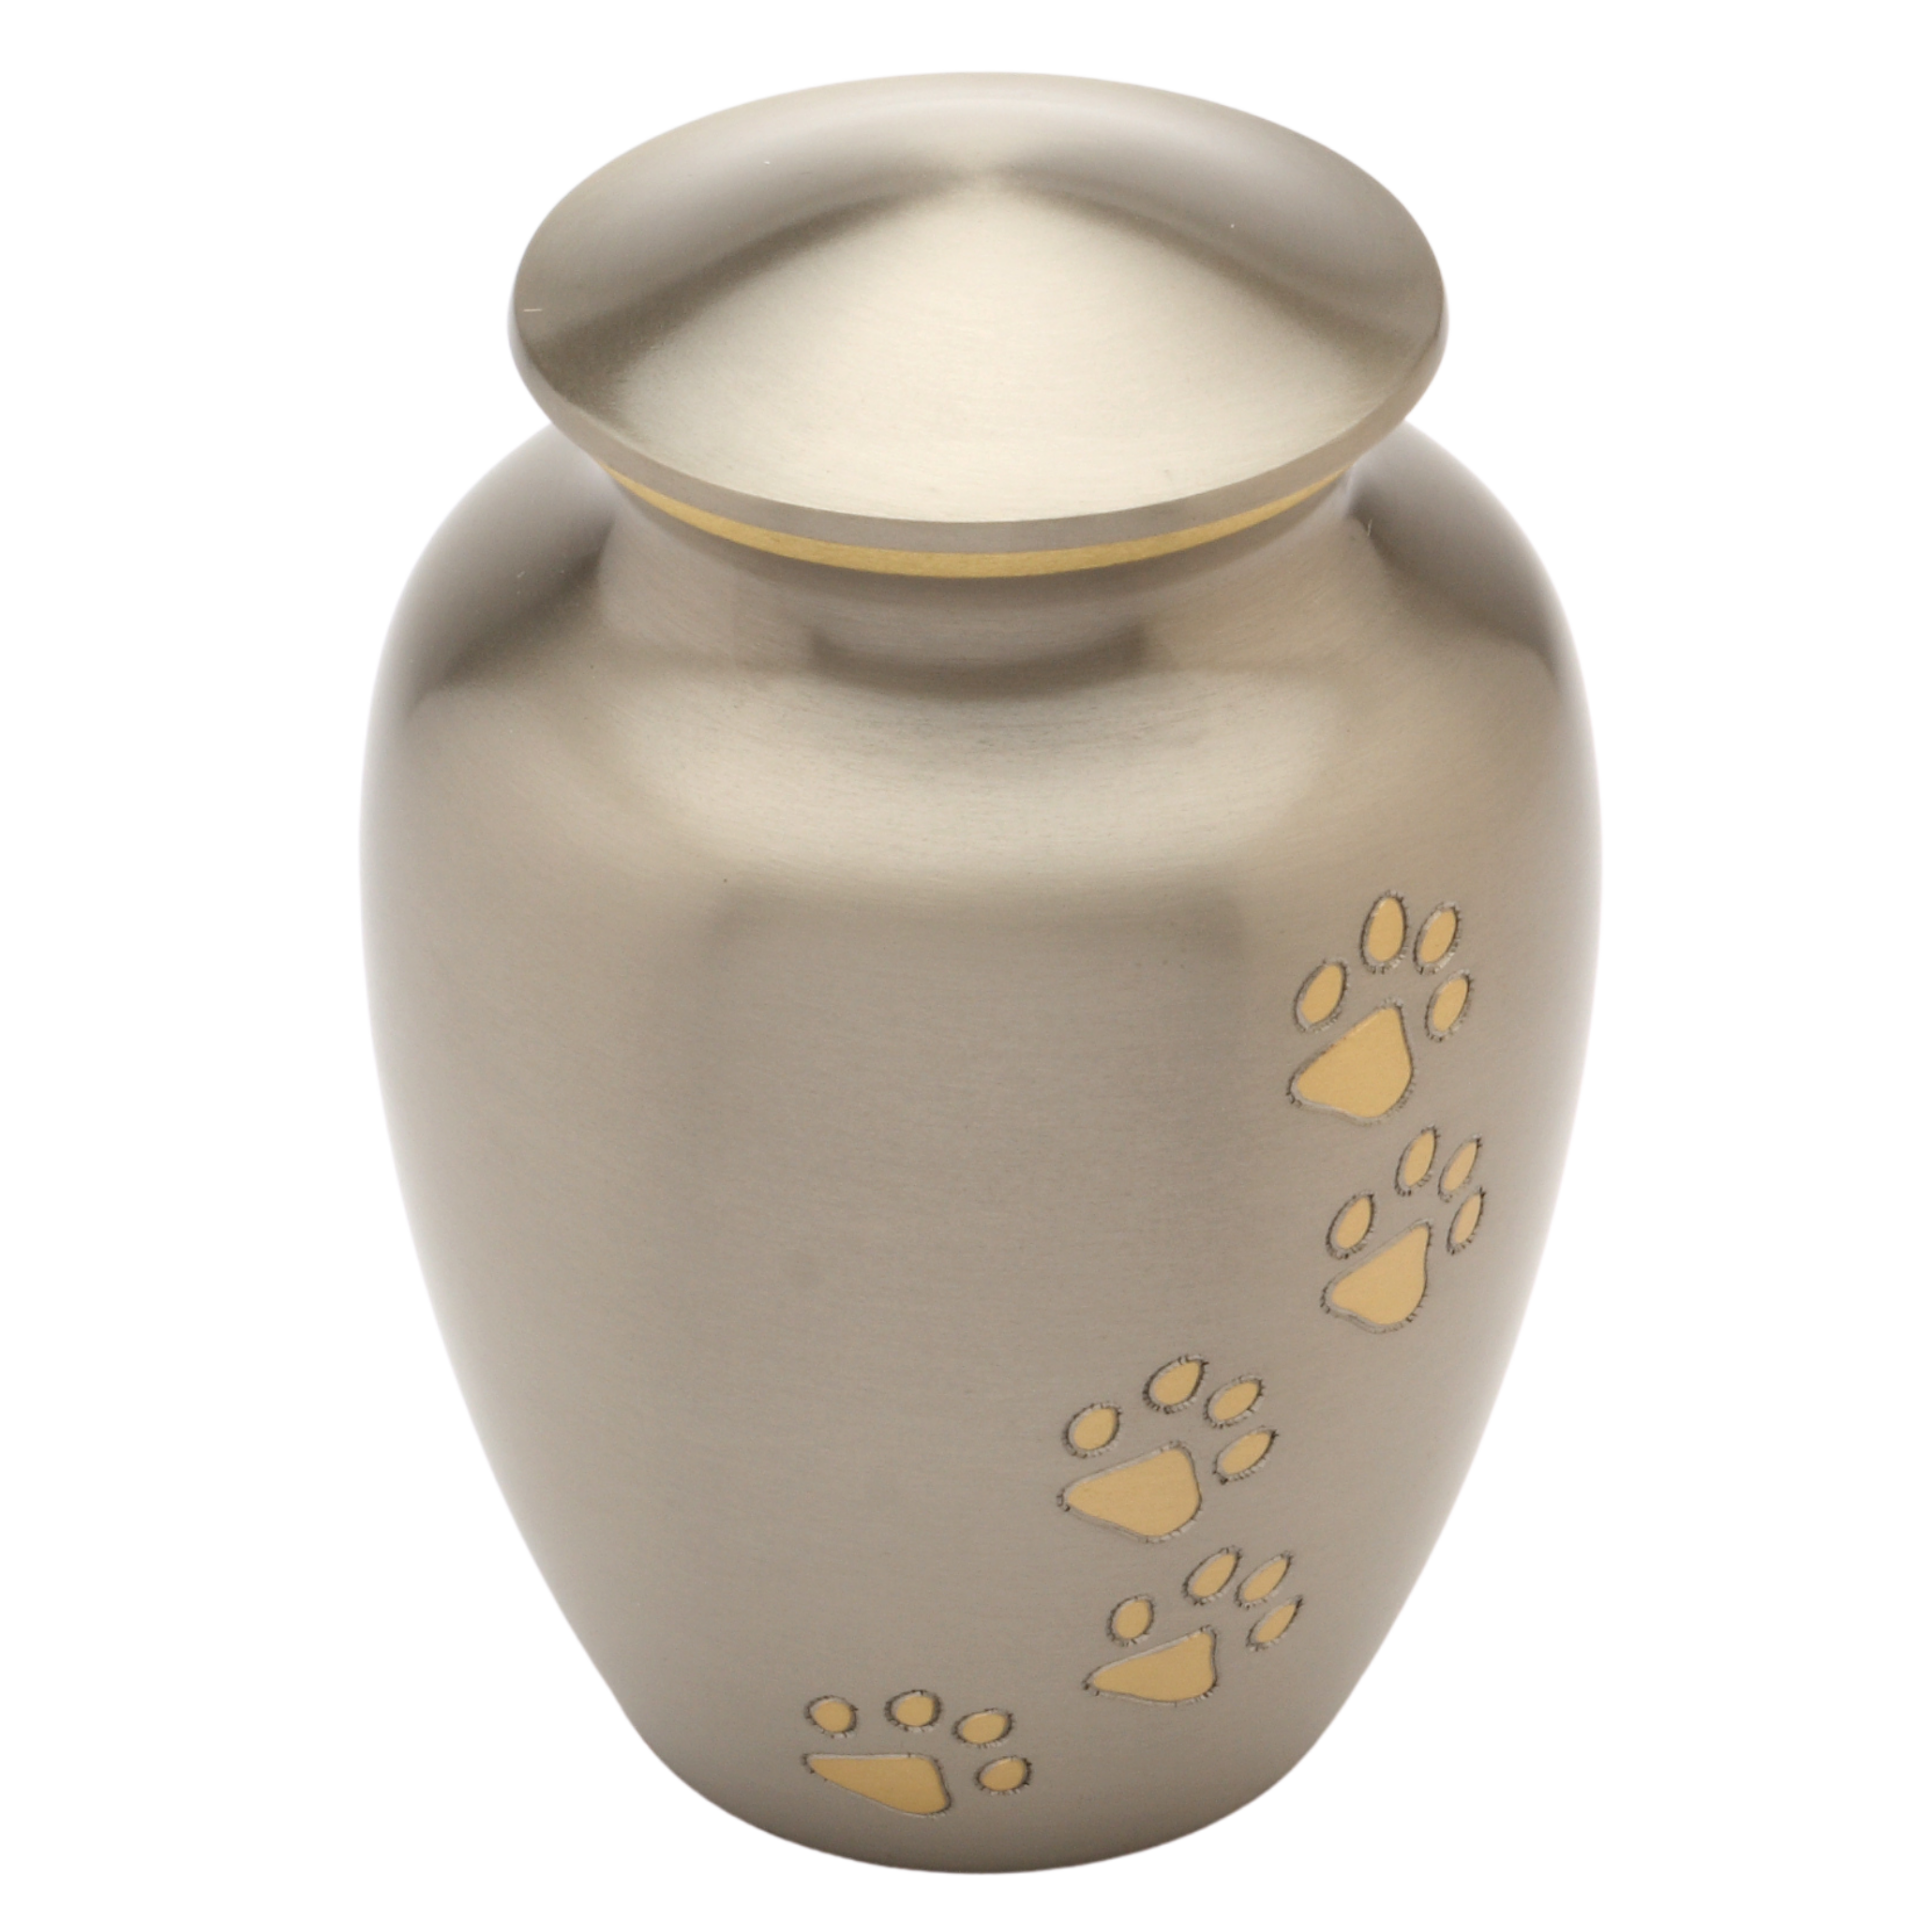 GRADE B - Matlock Pewter Cremation Ashes Pet Urn Range CAPACOTY UP TO 91 CUBIC INCHES RRP £79.